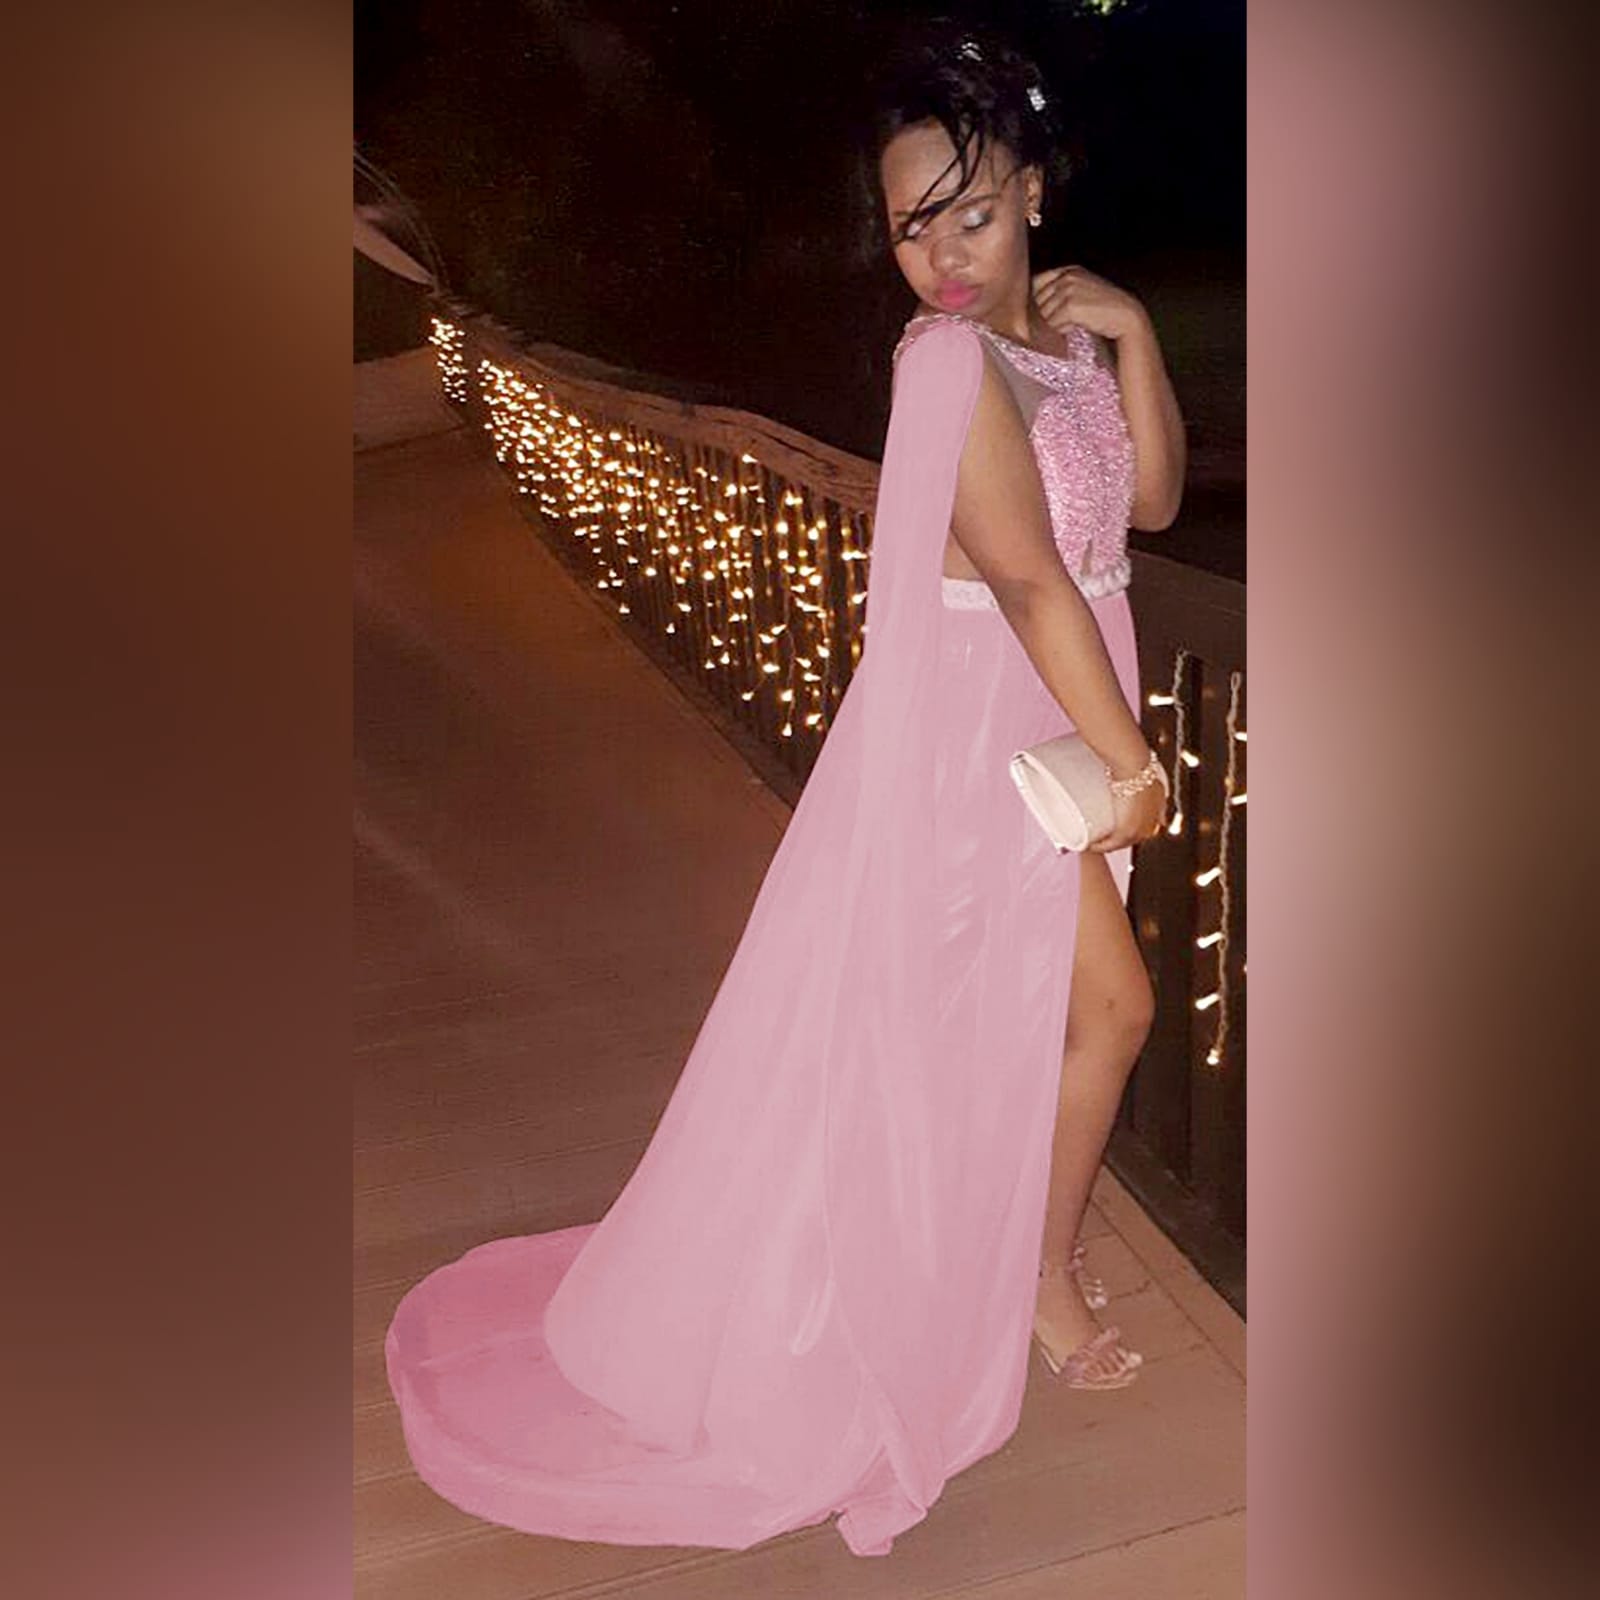 Dusty pink chiffon beaded prom dress 9 dusty pink chiffon beaded prom dress, bateau neckline effect with an illusion back, fully beaded bodice, plaited belt detail with a slit and a train. Shoulders with chiffon draping creating a goddess look.